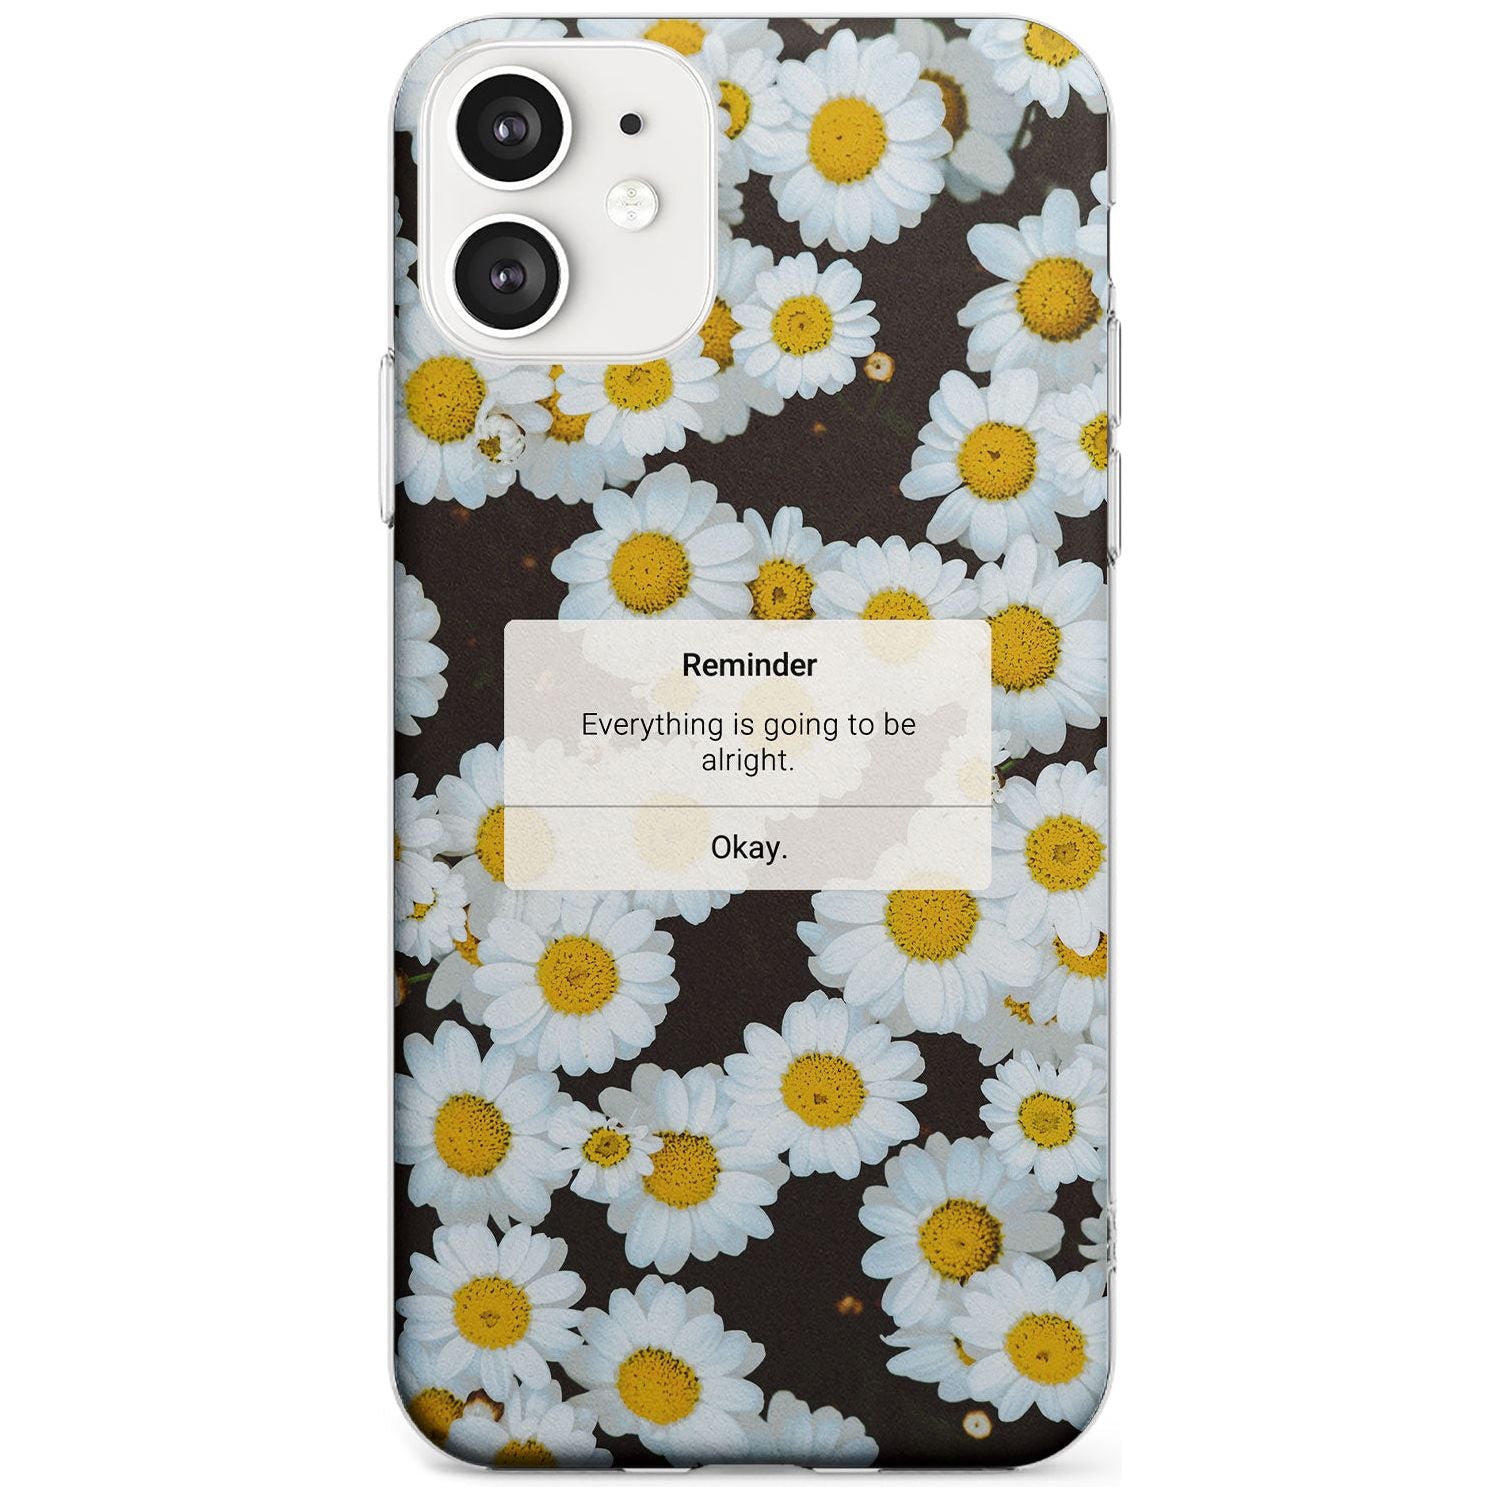 "Everything will be alright" iPhone Reminder Black Impact Phone Case for iPhone 11